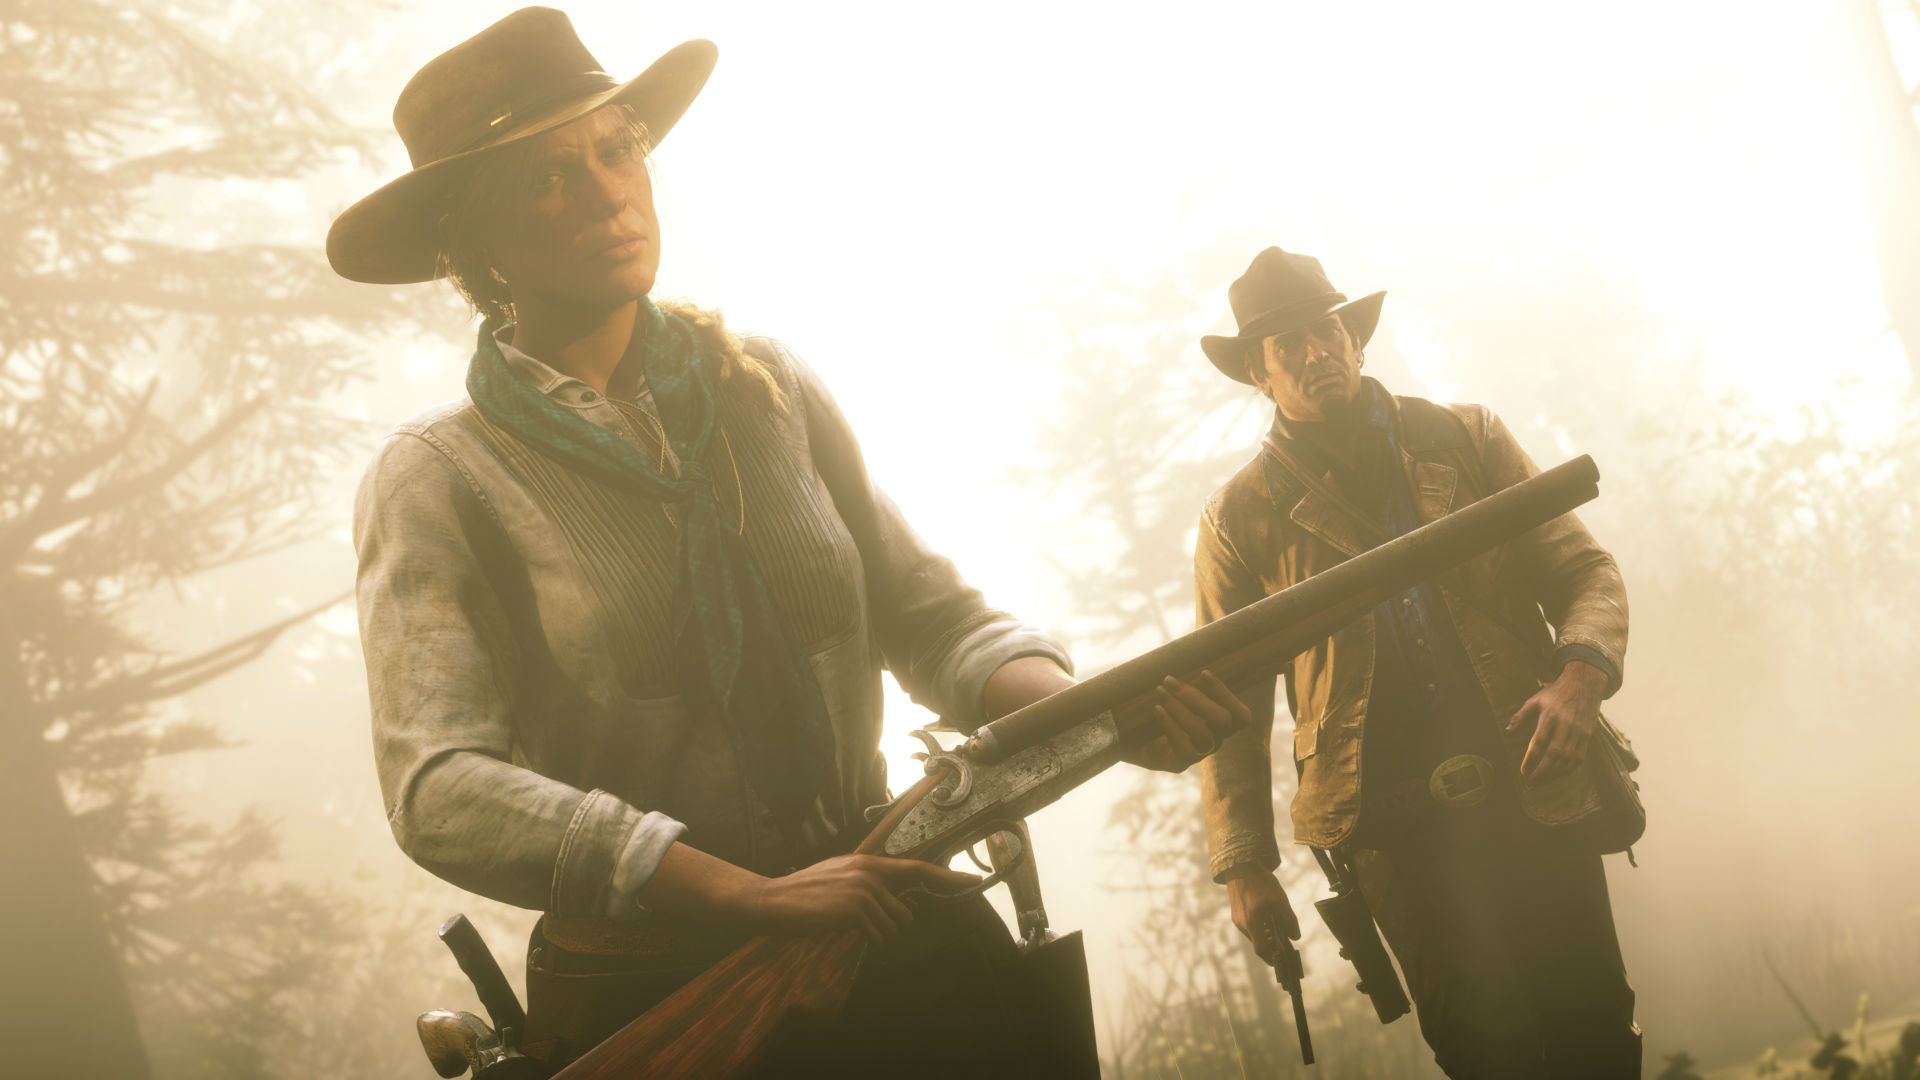 Here's why Red Dead Redemption 2 looks and feels its best on PC